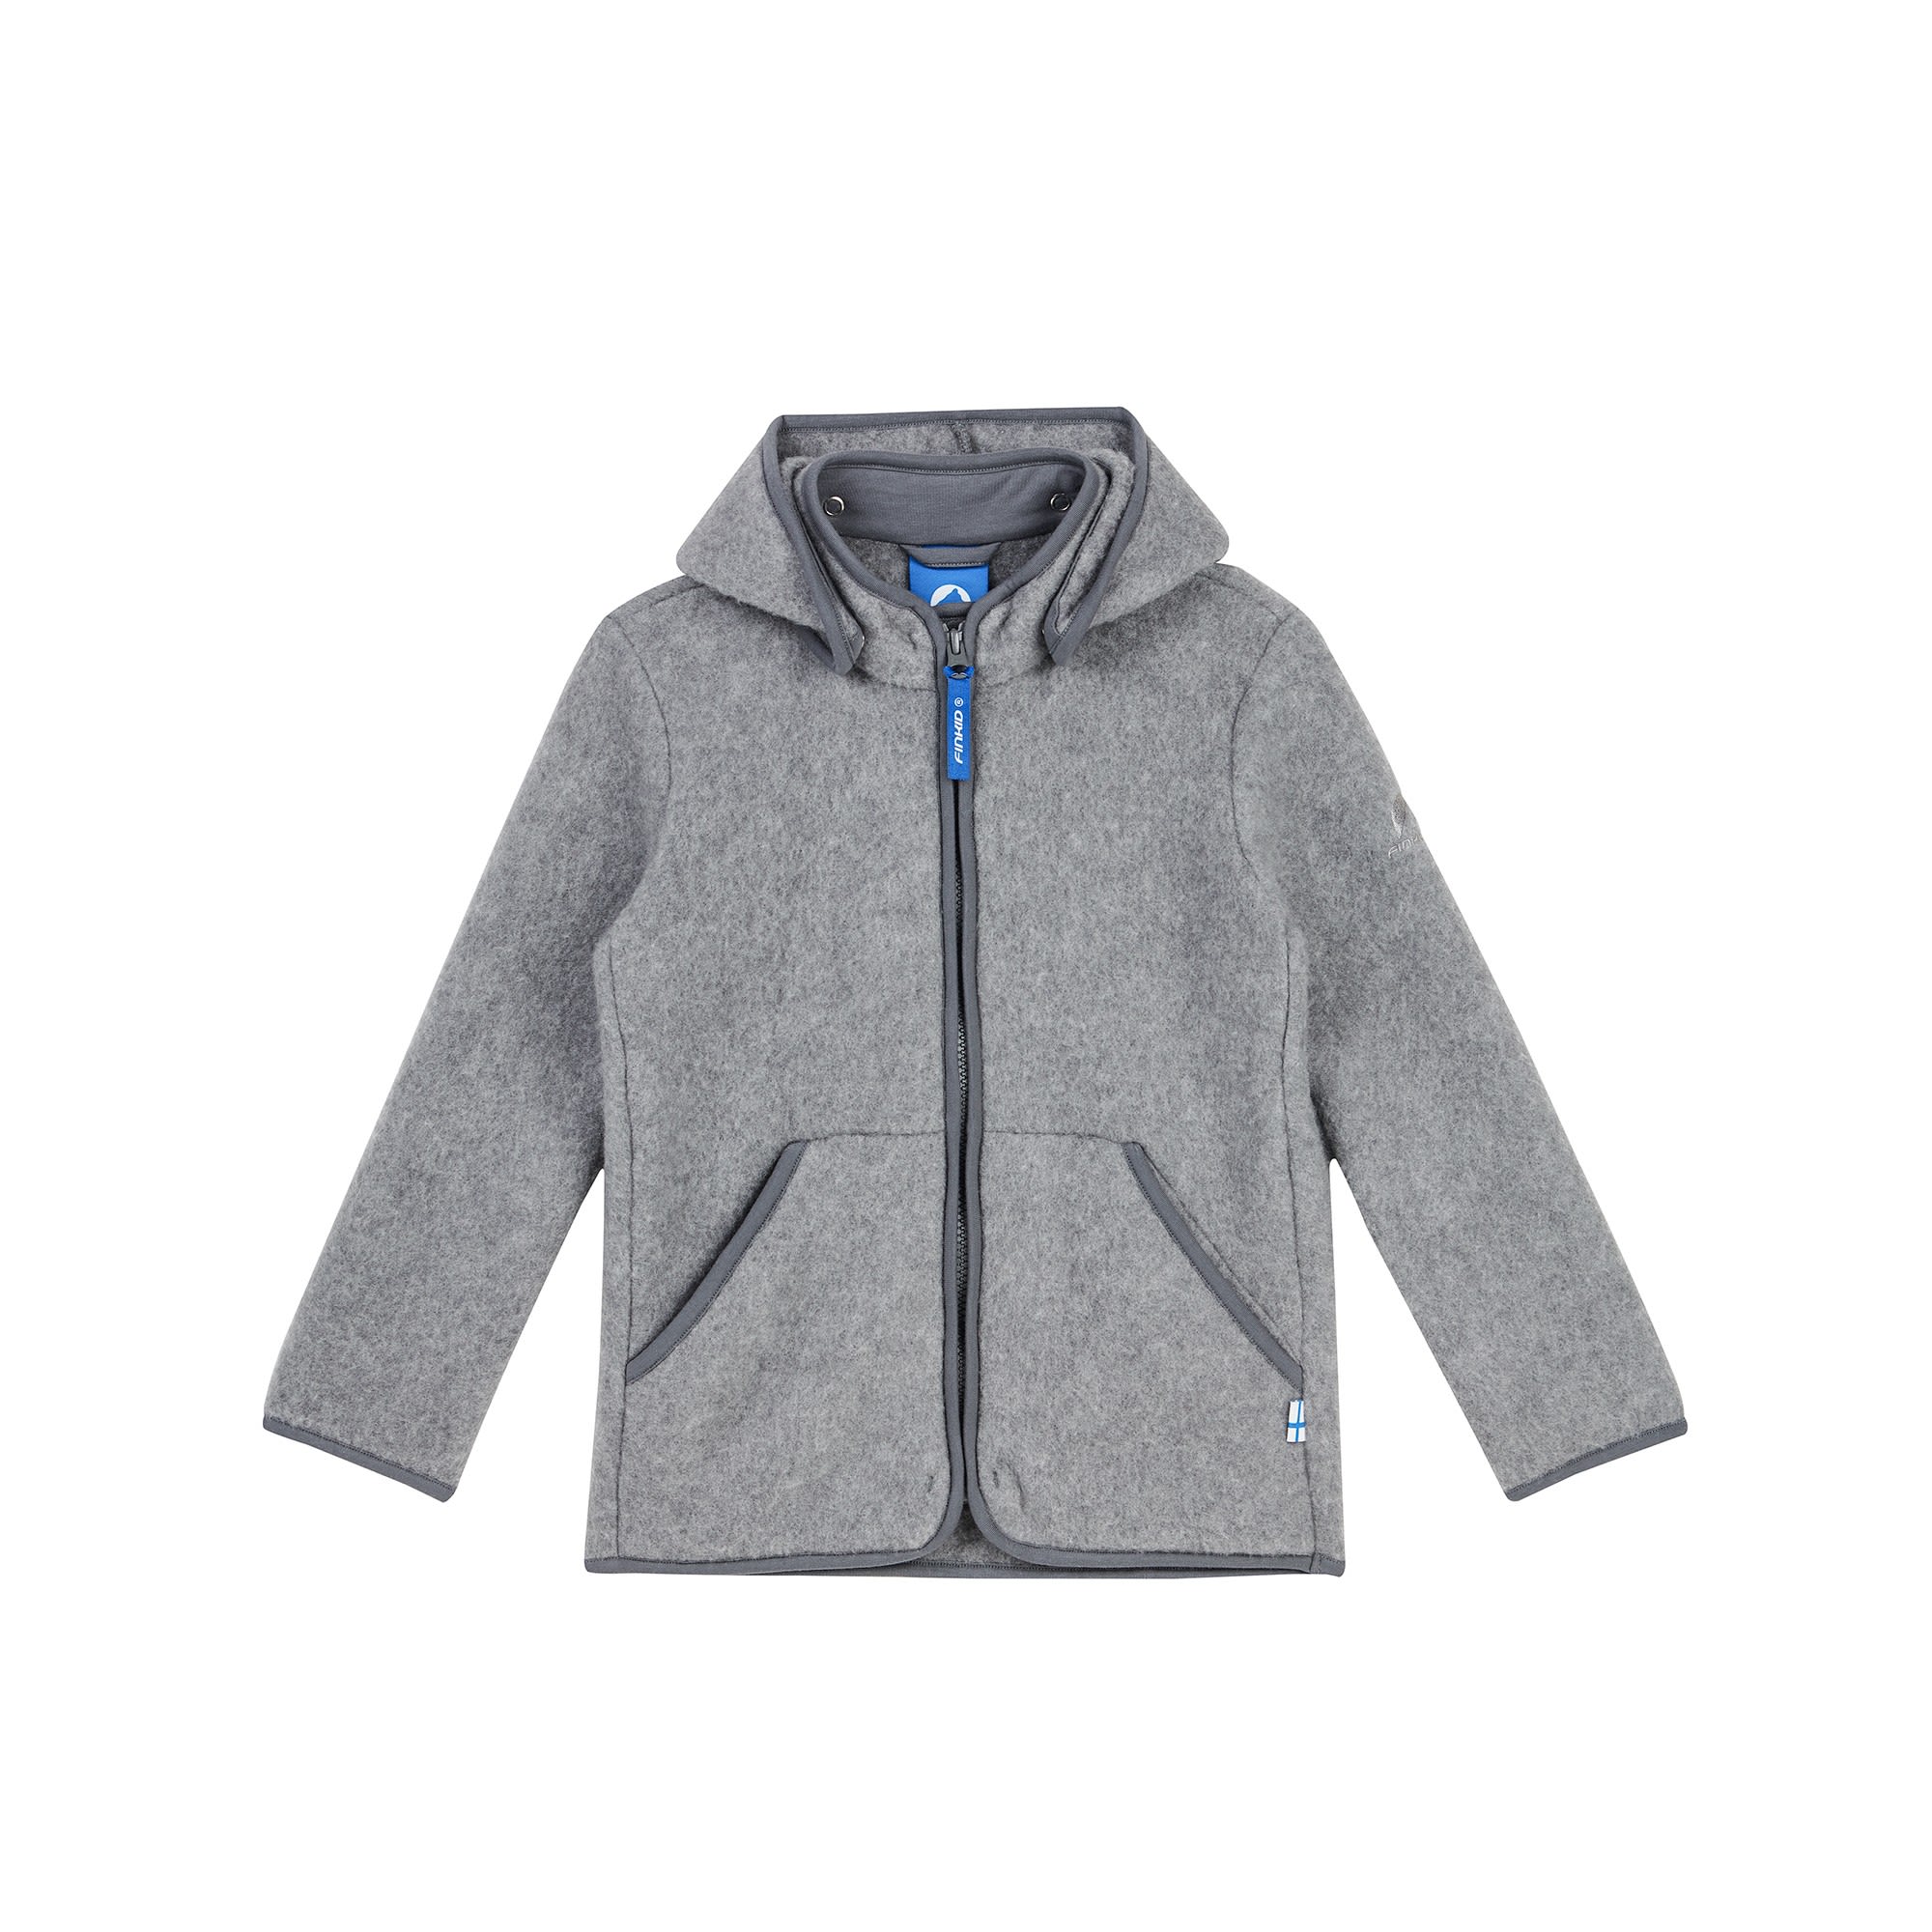 Finkid Luonto Wool (Vorgngermodell) Grau- Anoraks- Grsse 80 - 90 - Farbe Charcoal